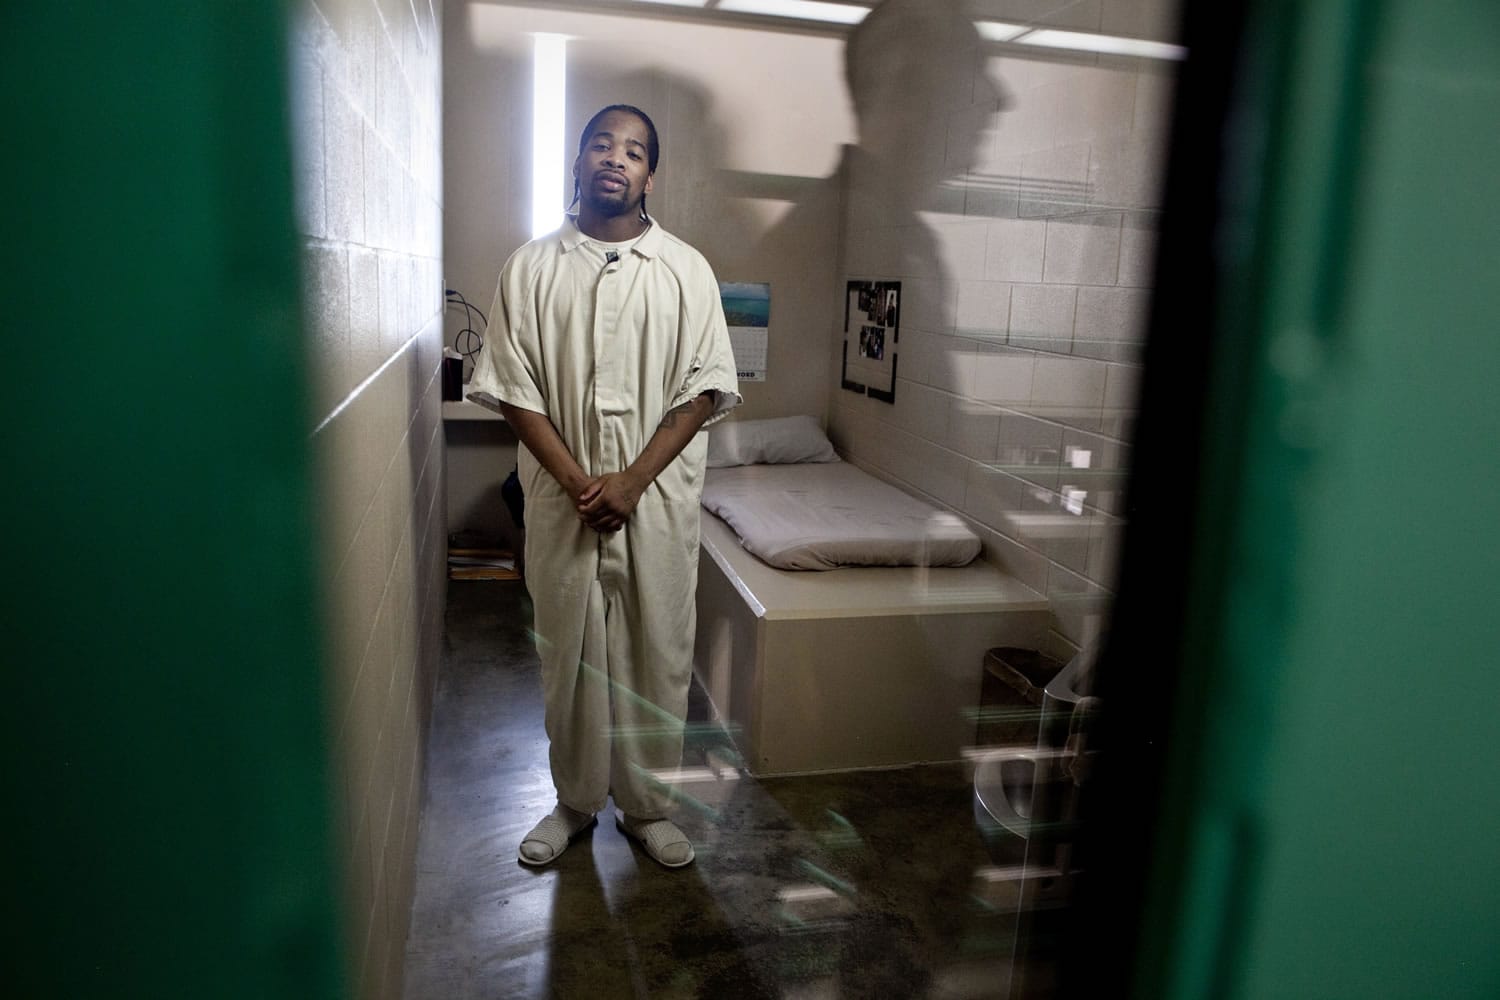 Earnest Collins stands in the Intensive Management Unit at Clallam Bay on July 11. Collins said he's open to change after fights twice landed him in the unit. &quot;If you're not mentally strong, it'll drive you crazy,&quot; Collins said.